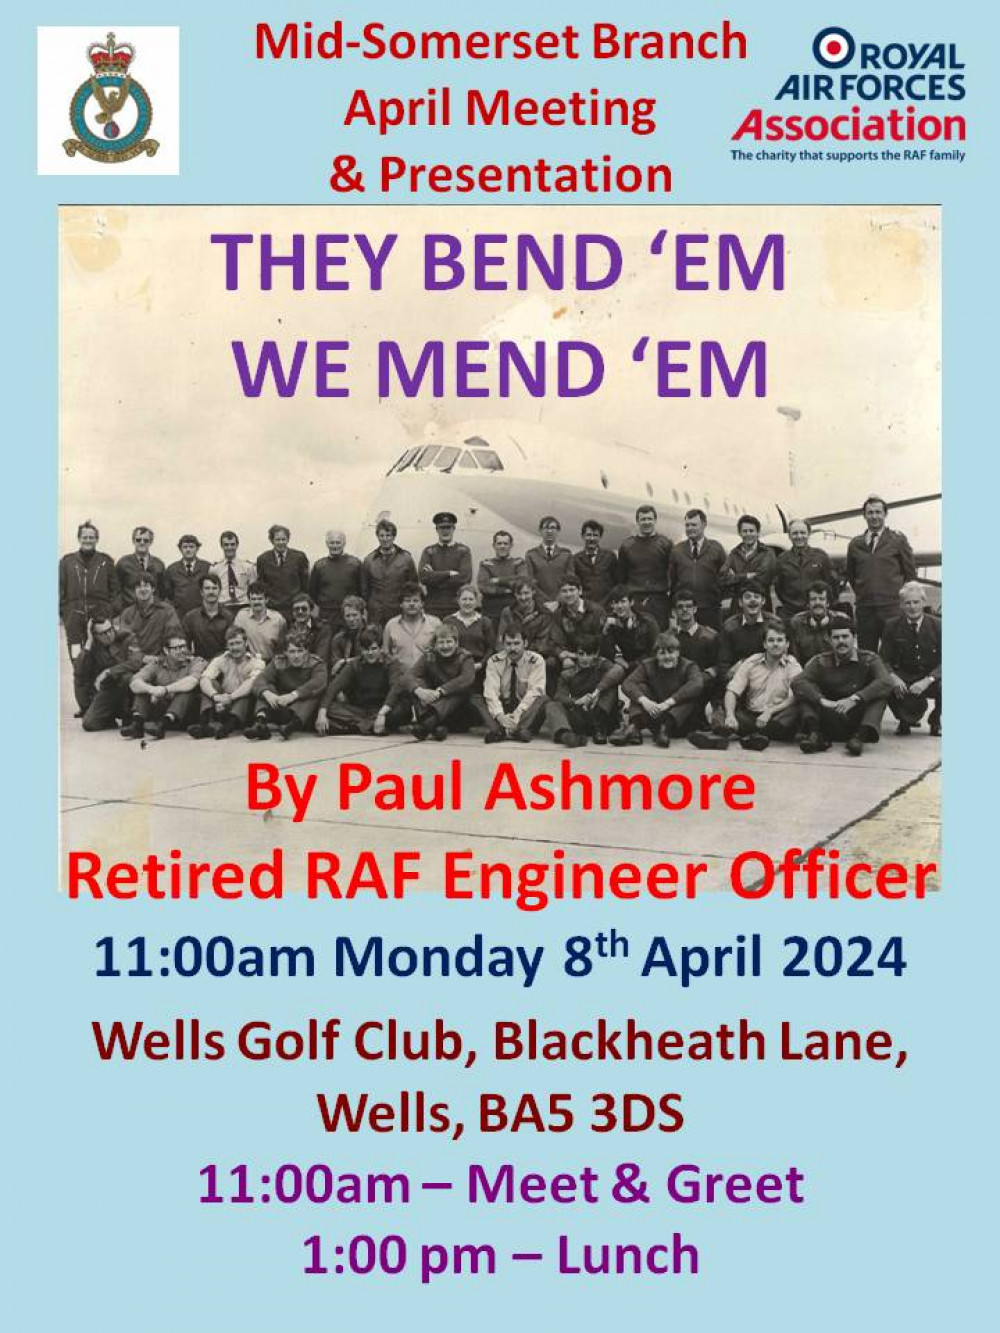 ROYAL AIR FORCES MID-SOMERSET BRANCH MEETING & PRESENTATION